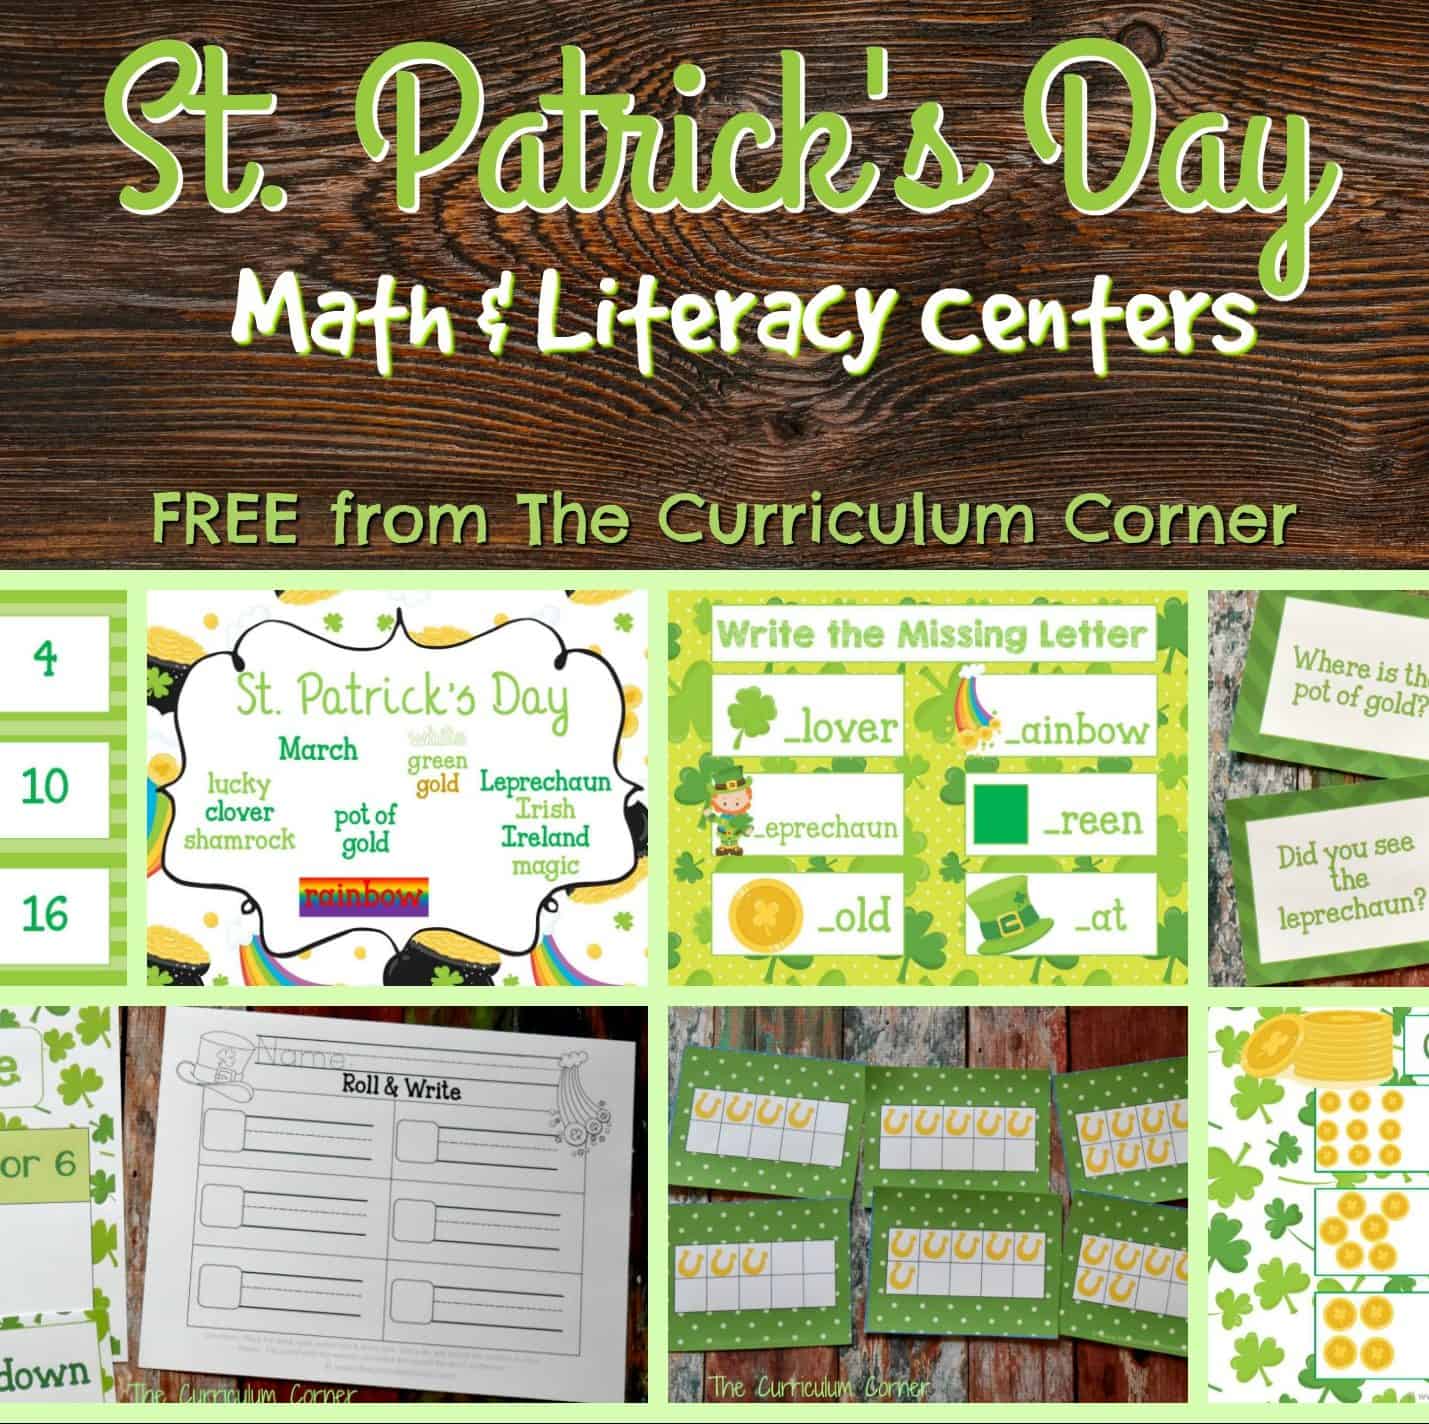 FREE Set of St. Patrick's Day Centers for Math & Literacy from The Curriculum Corner | Fry Words | math facts | 10 Frames